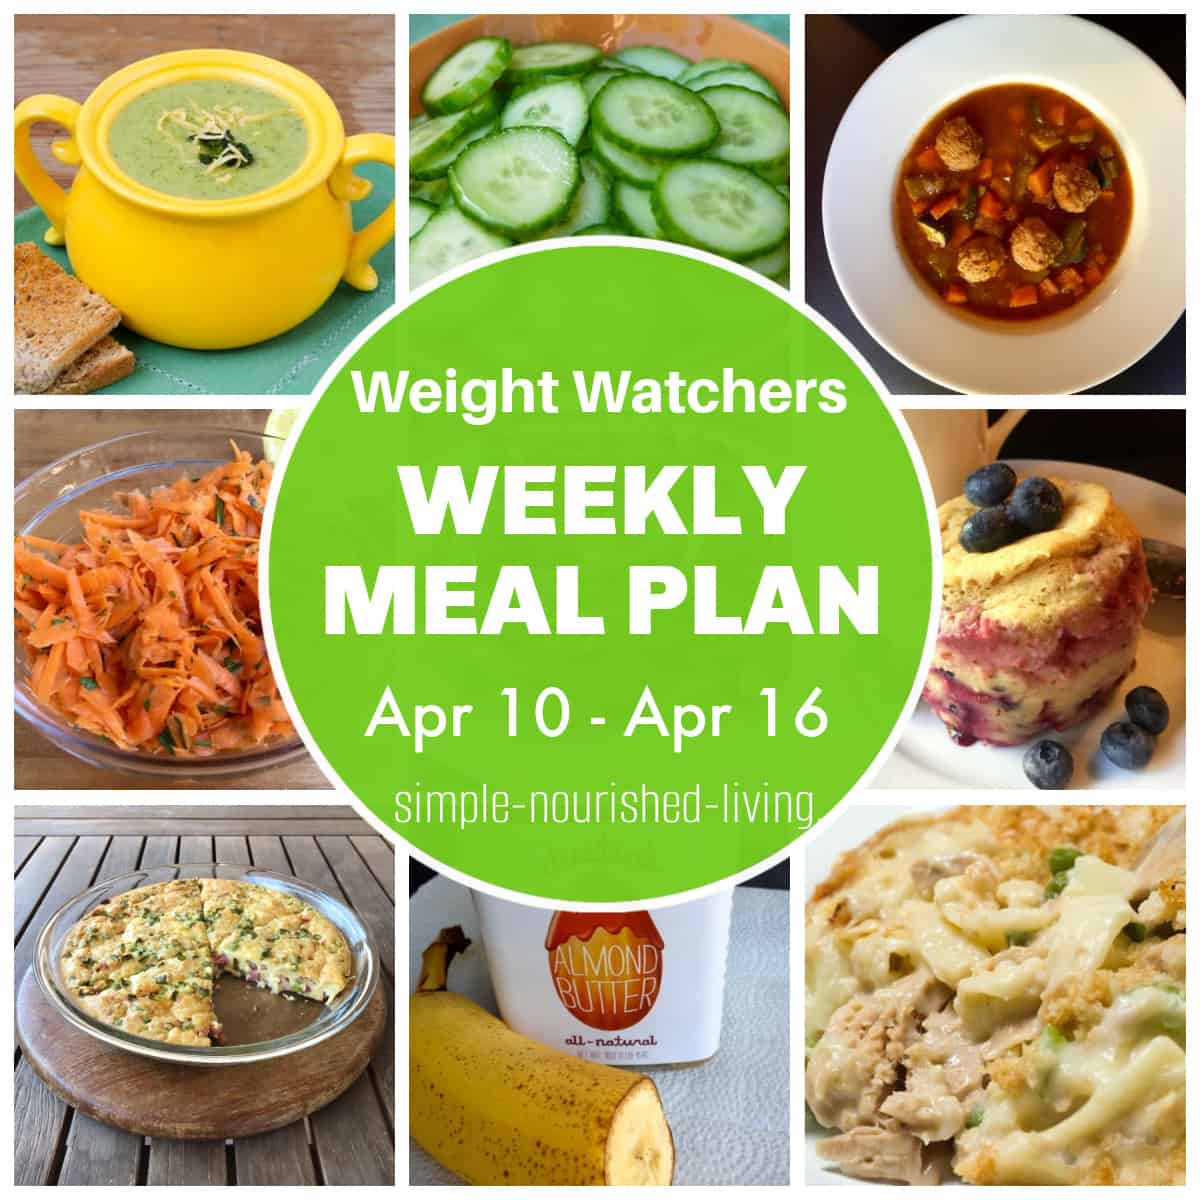 Food Photo Collage: crock of broccoli soup, cucumber salad, meatball soup, shredded carrot salad, microwave blueberry pancake, ham and swiss pie impossible pie, banana and almond butter, tuna casserole. Round Green Text Overlay: Weight Watchers Weekly Meal Plan April 10 - April 16